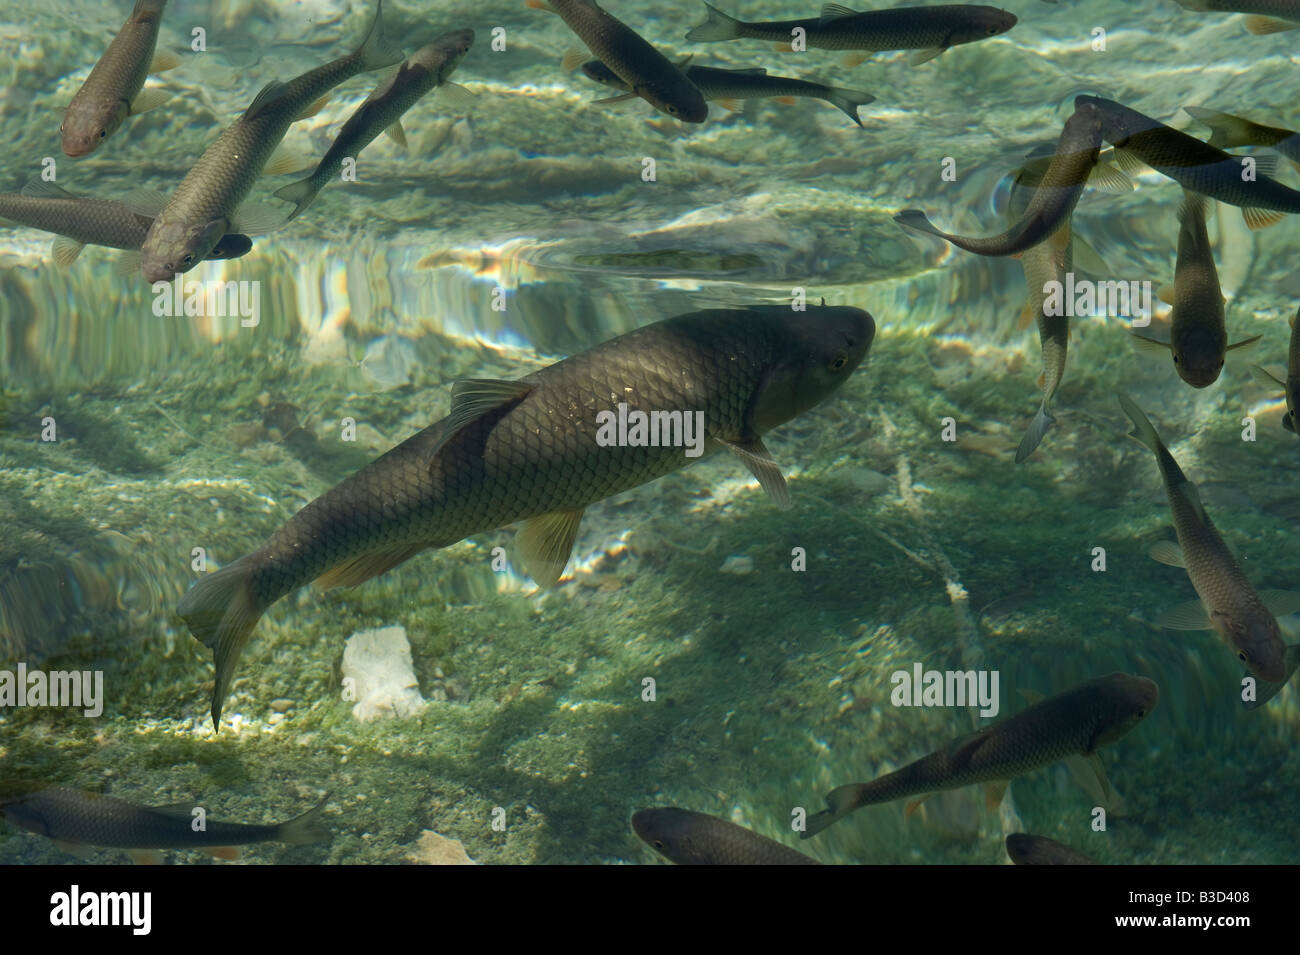 Fish in the amazingly clear end cleen waters in Plitvice Lakes National Park Croatia County of Lika Senj 10km east of Bihac Croa Stock Photo